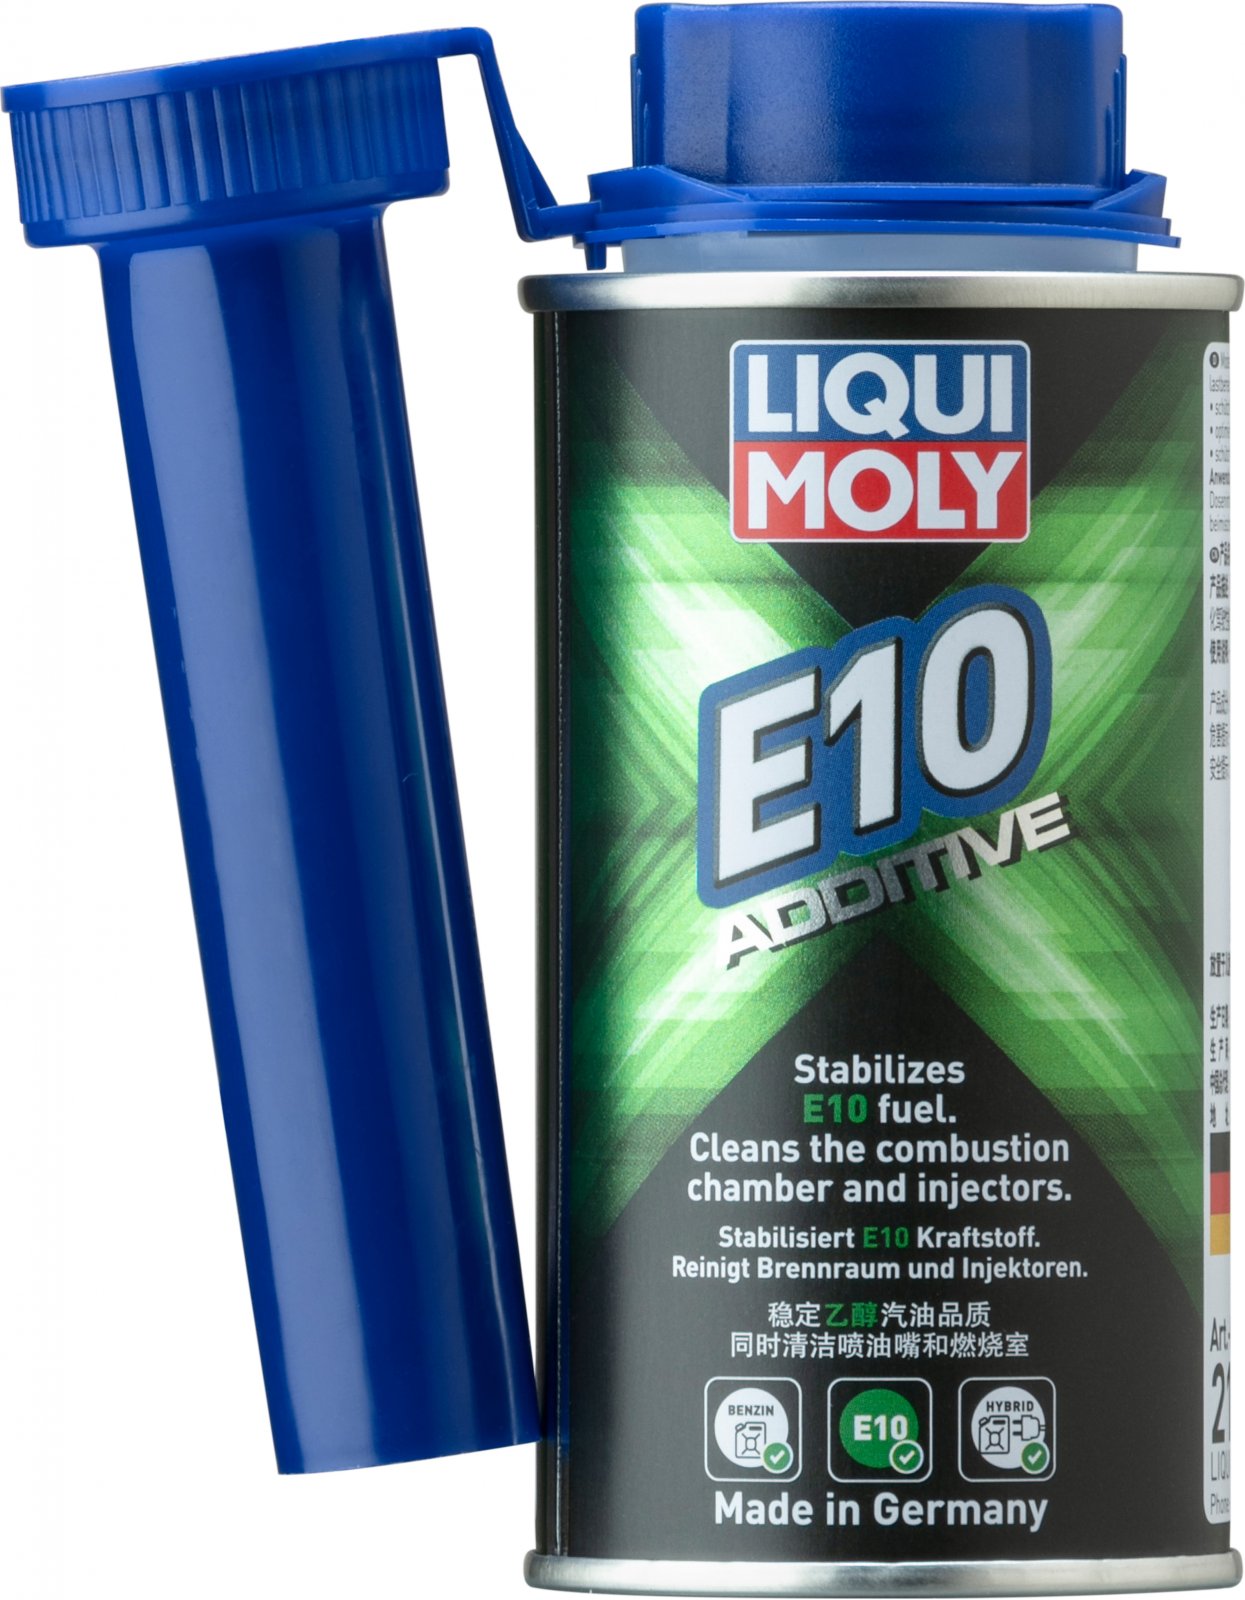 Additive Liqui Moly Injection Cleaner 5110 - 2X 300ml